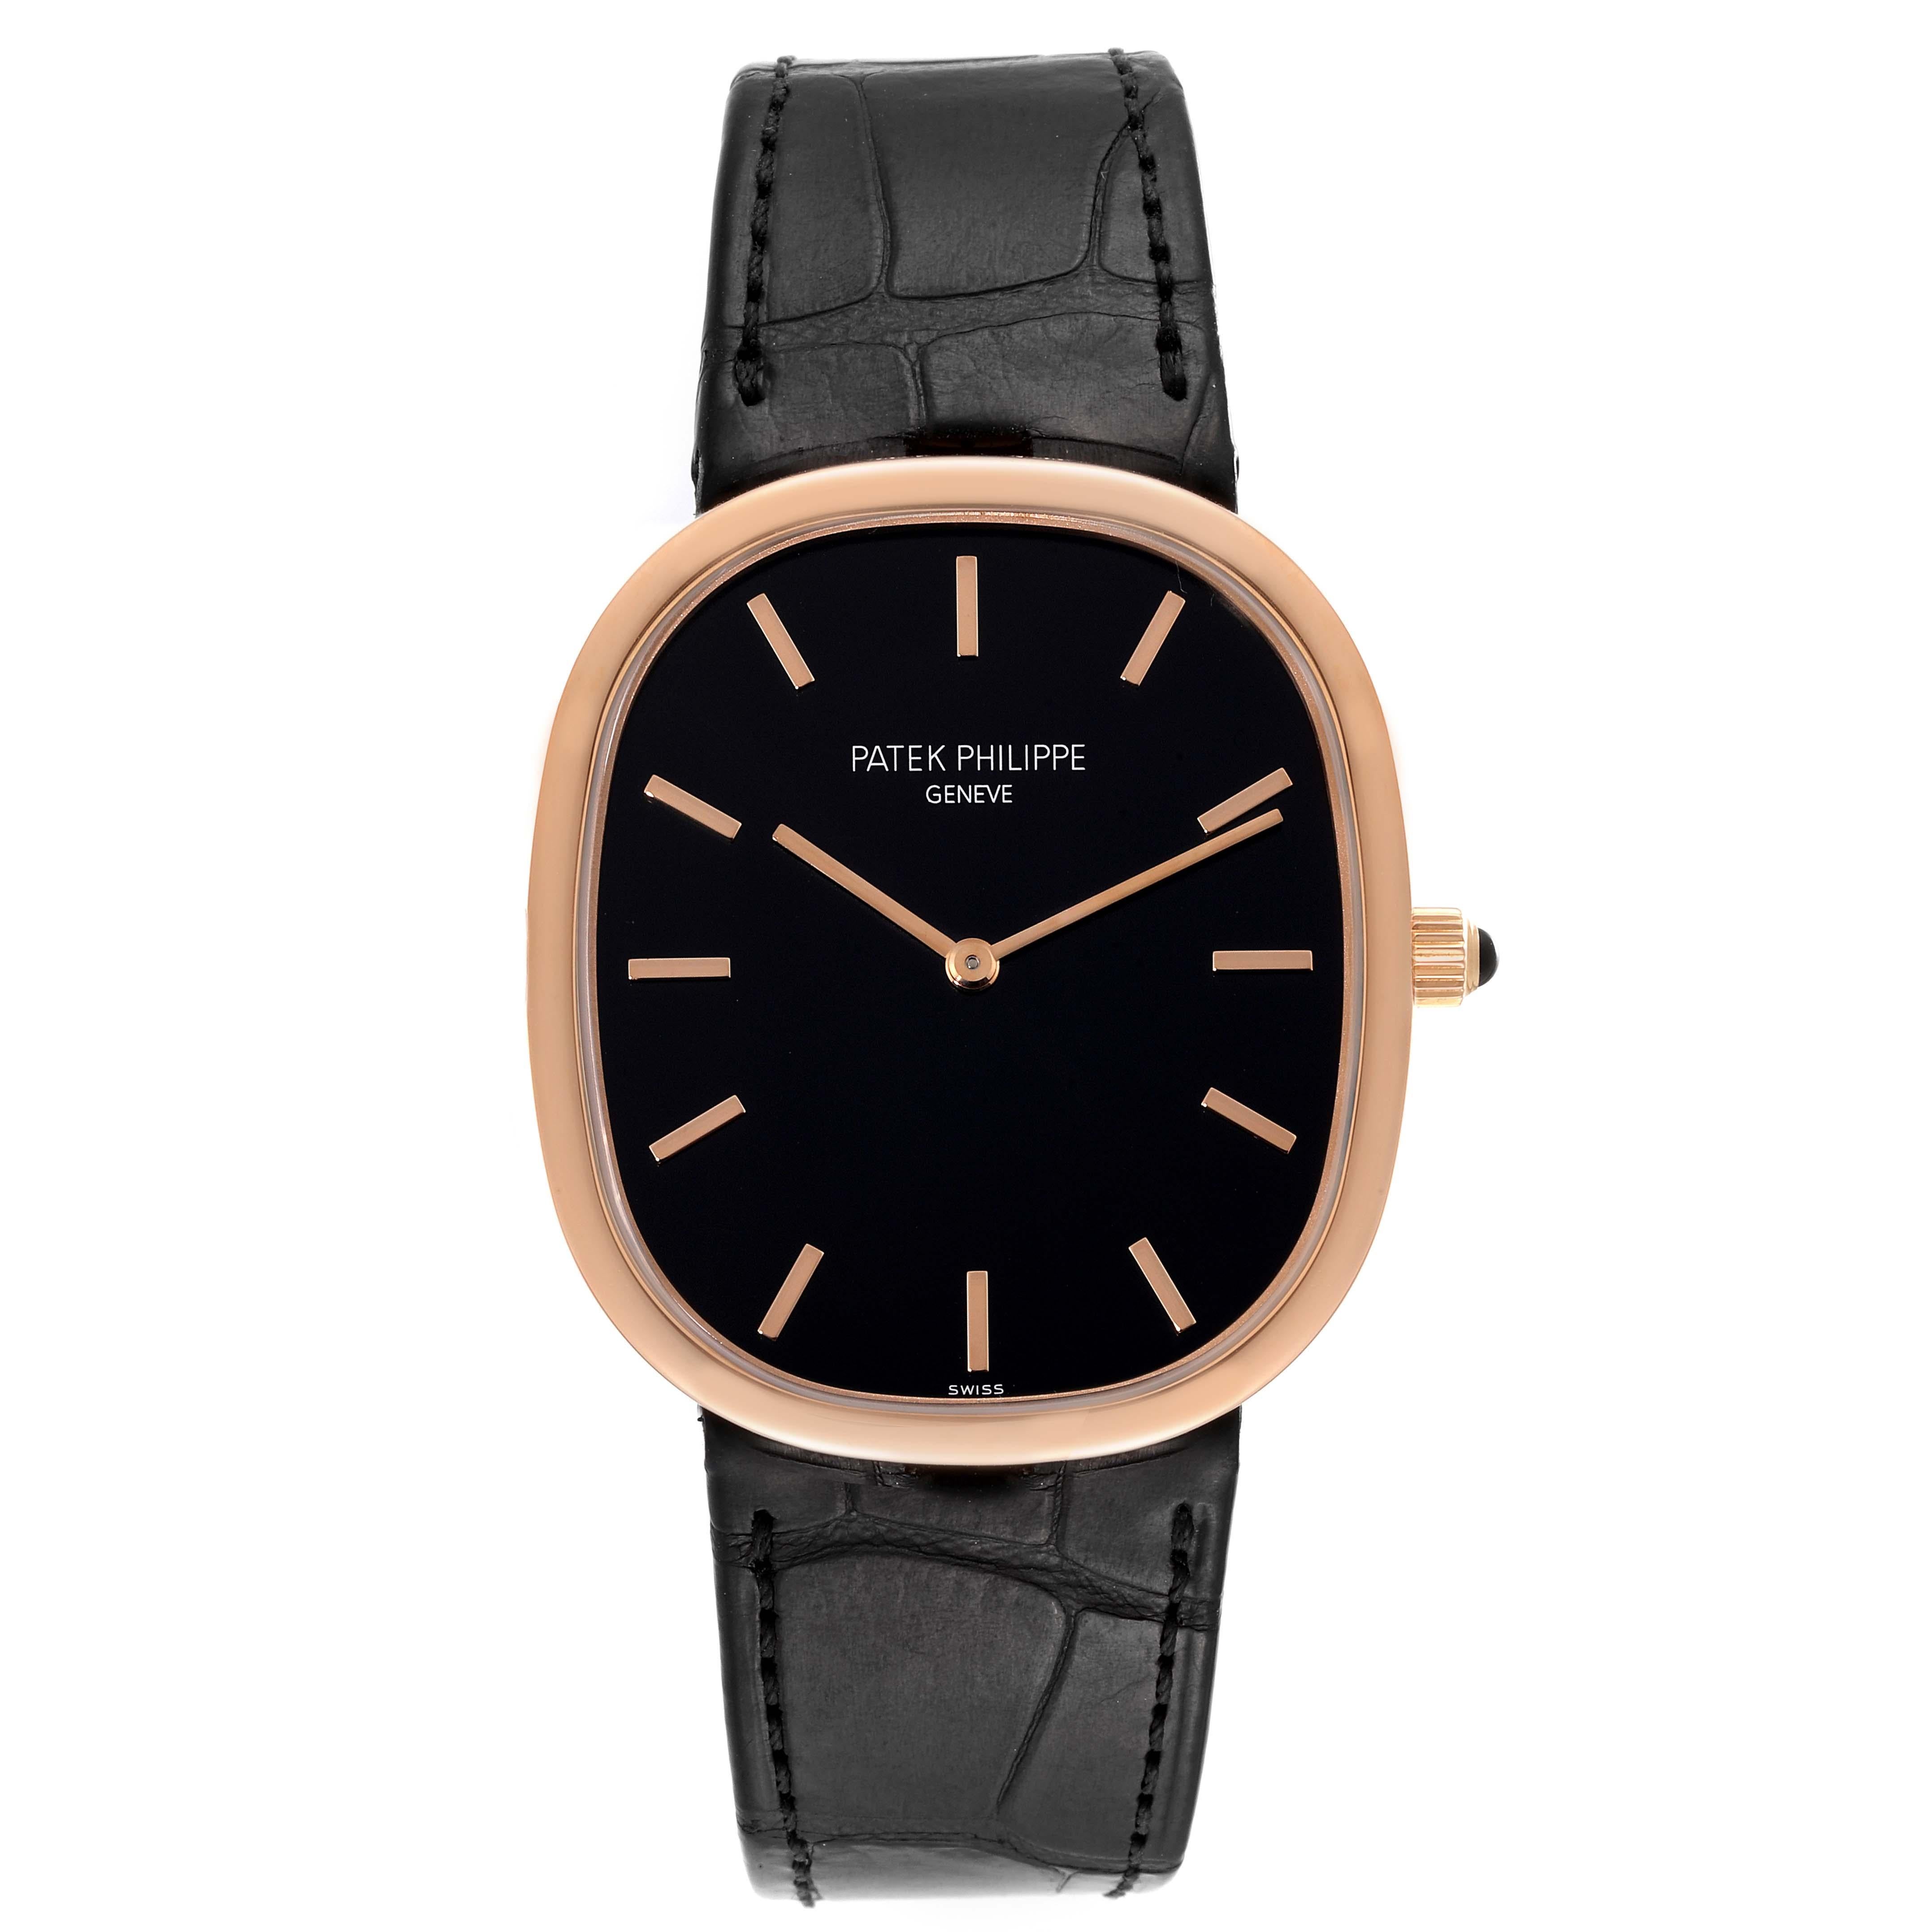 Patek Philippe Golden Ellipse Grande Taille Rose Gold Mens Watch 5738 Papers. Automatic self-winding lever movement. 18k rose gold ultra-thin case 34.5 x 39.5 mm. T-bar lugs. Crown set with an onyx. . Scratch resistant sapphire crystal. Ebony black